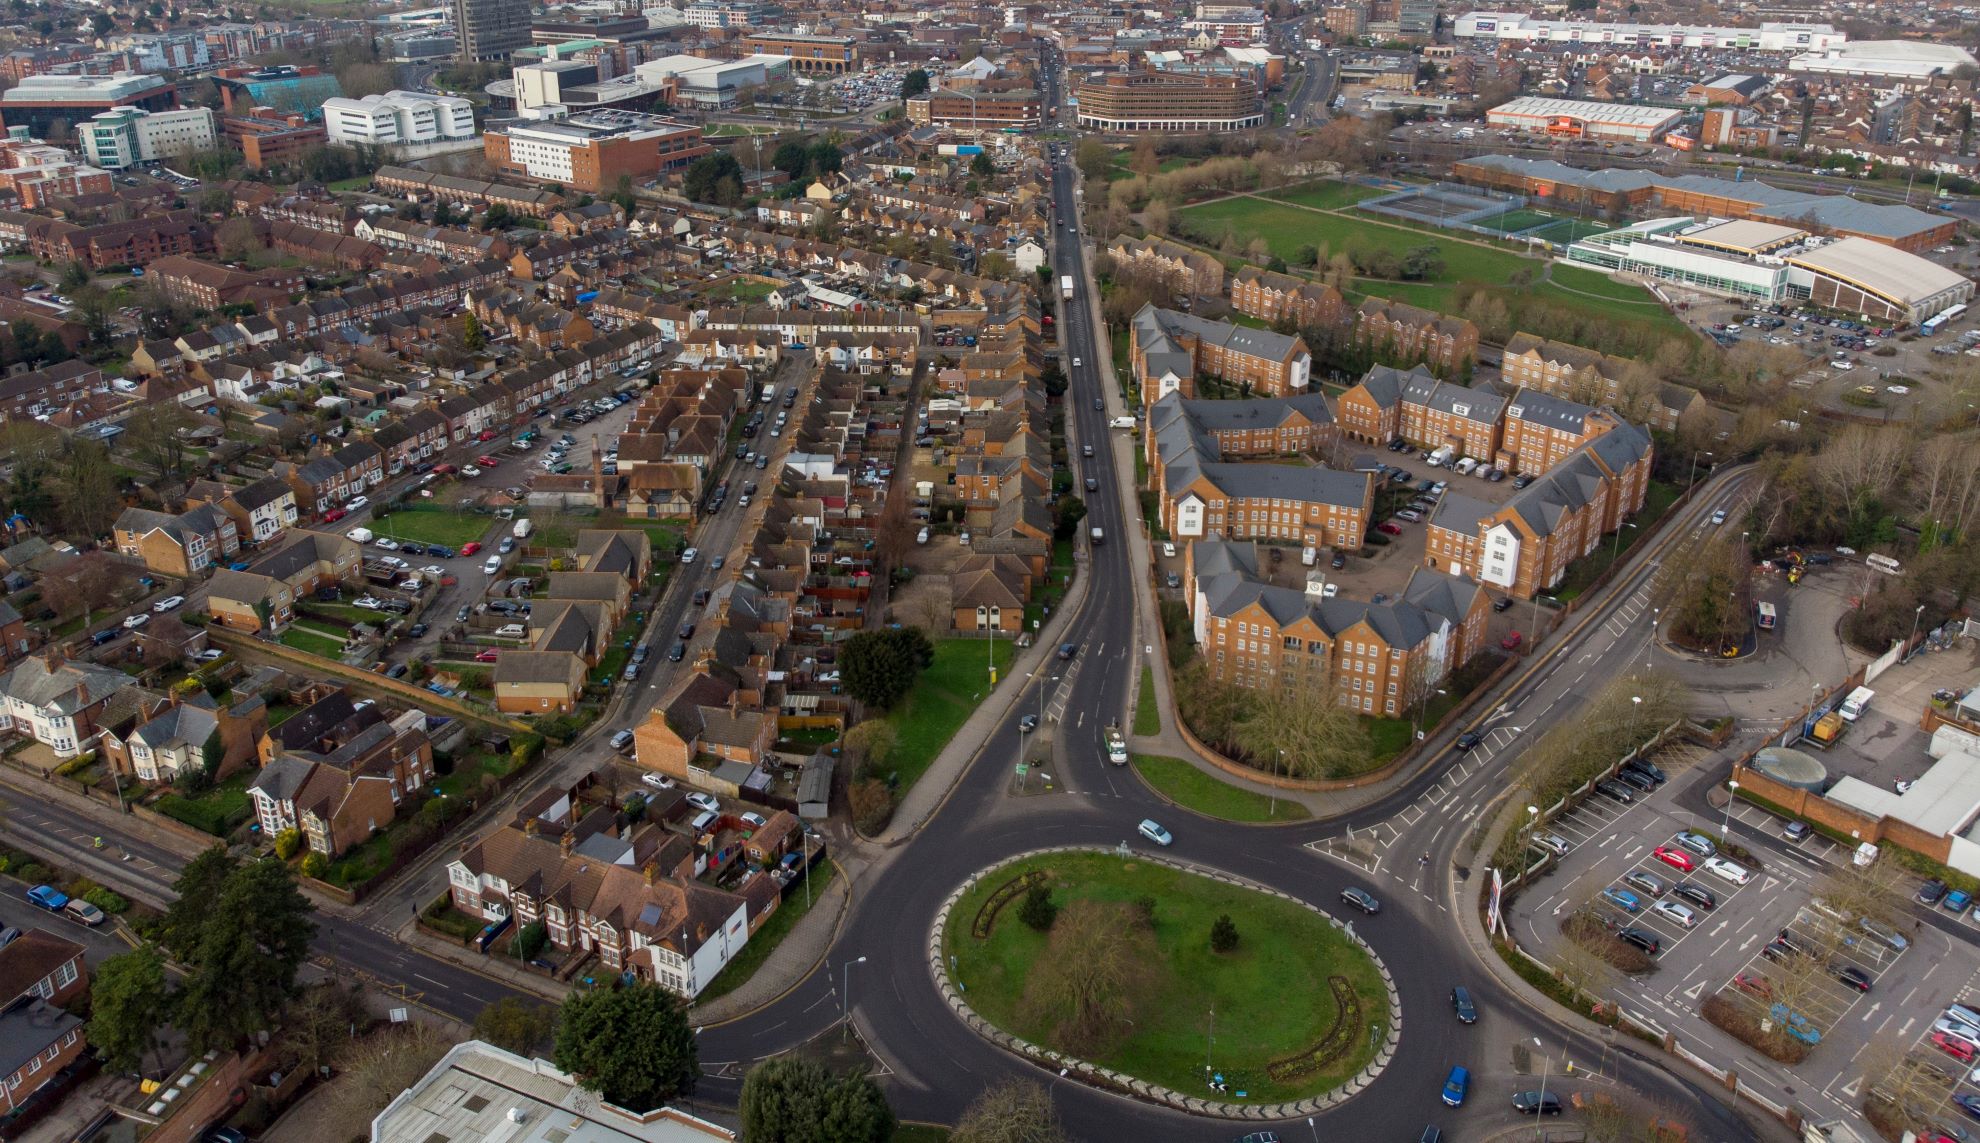 Aerial view of a housing estate and industrial buildings in a city centre.